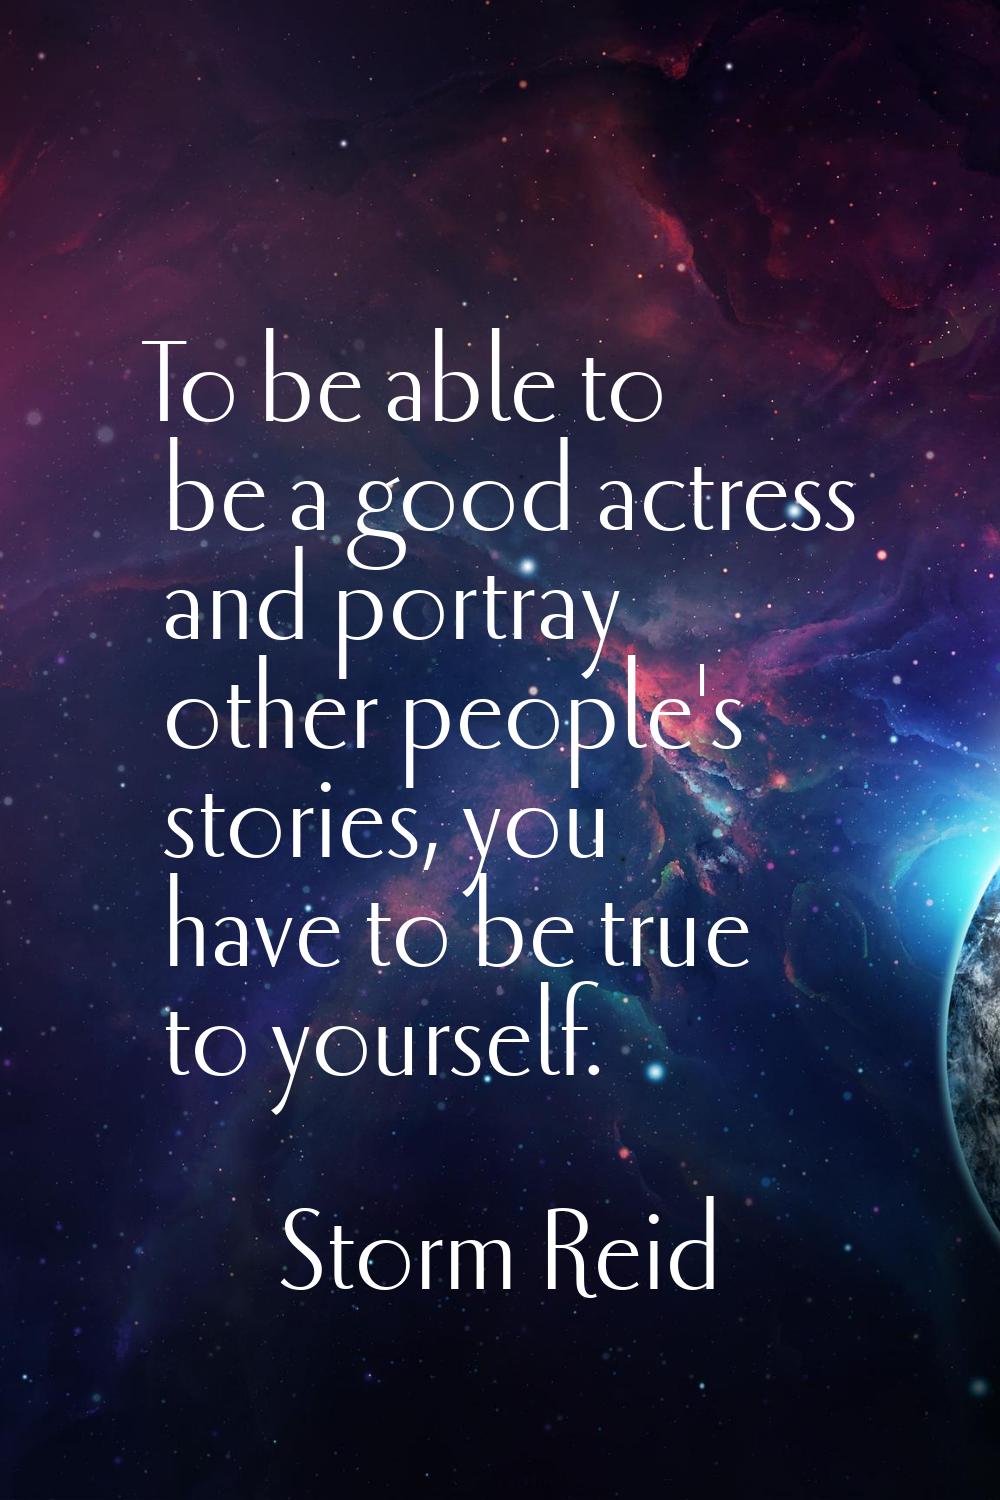 To be able to be a good actress and portray other people's stories, you have to be true to yourself